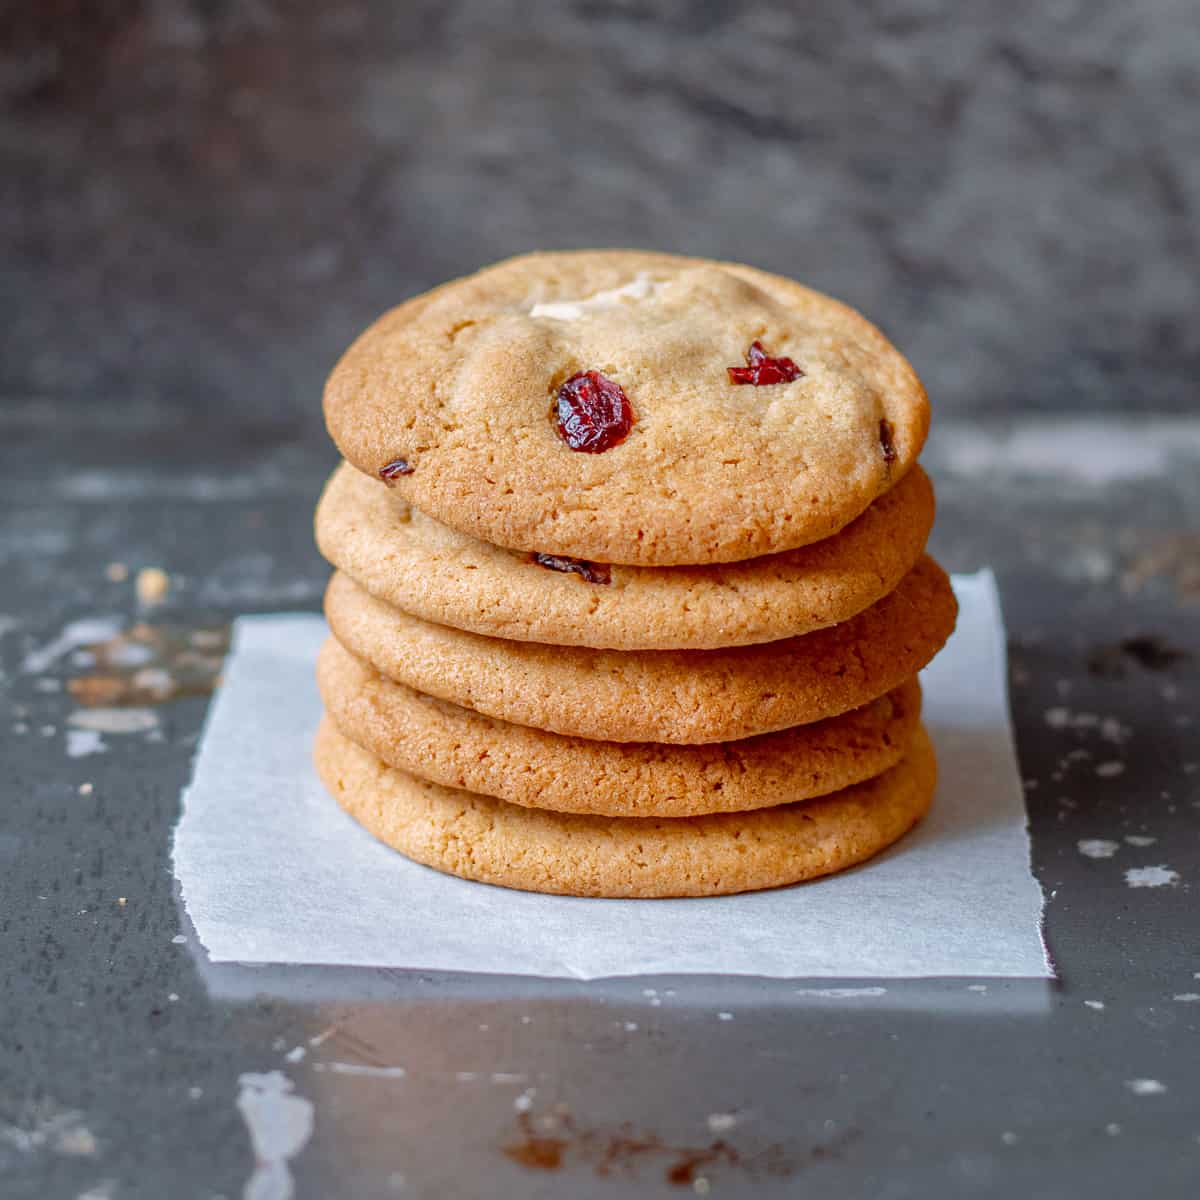 5 white chocolate and cranberry cookies in a stack